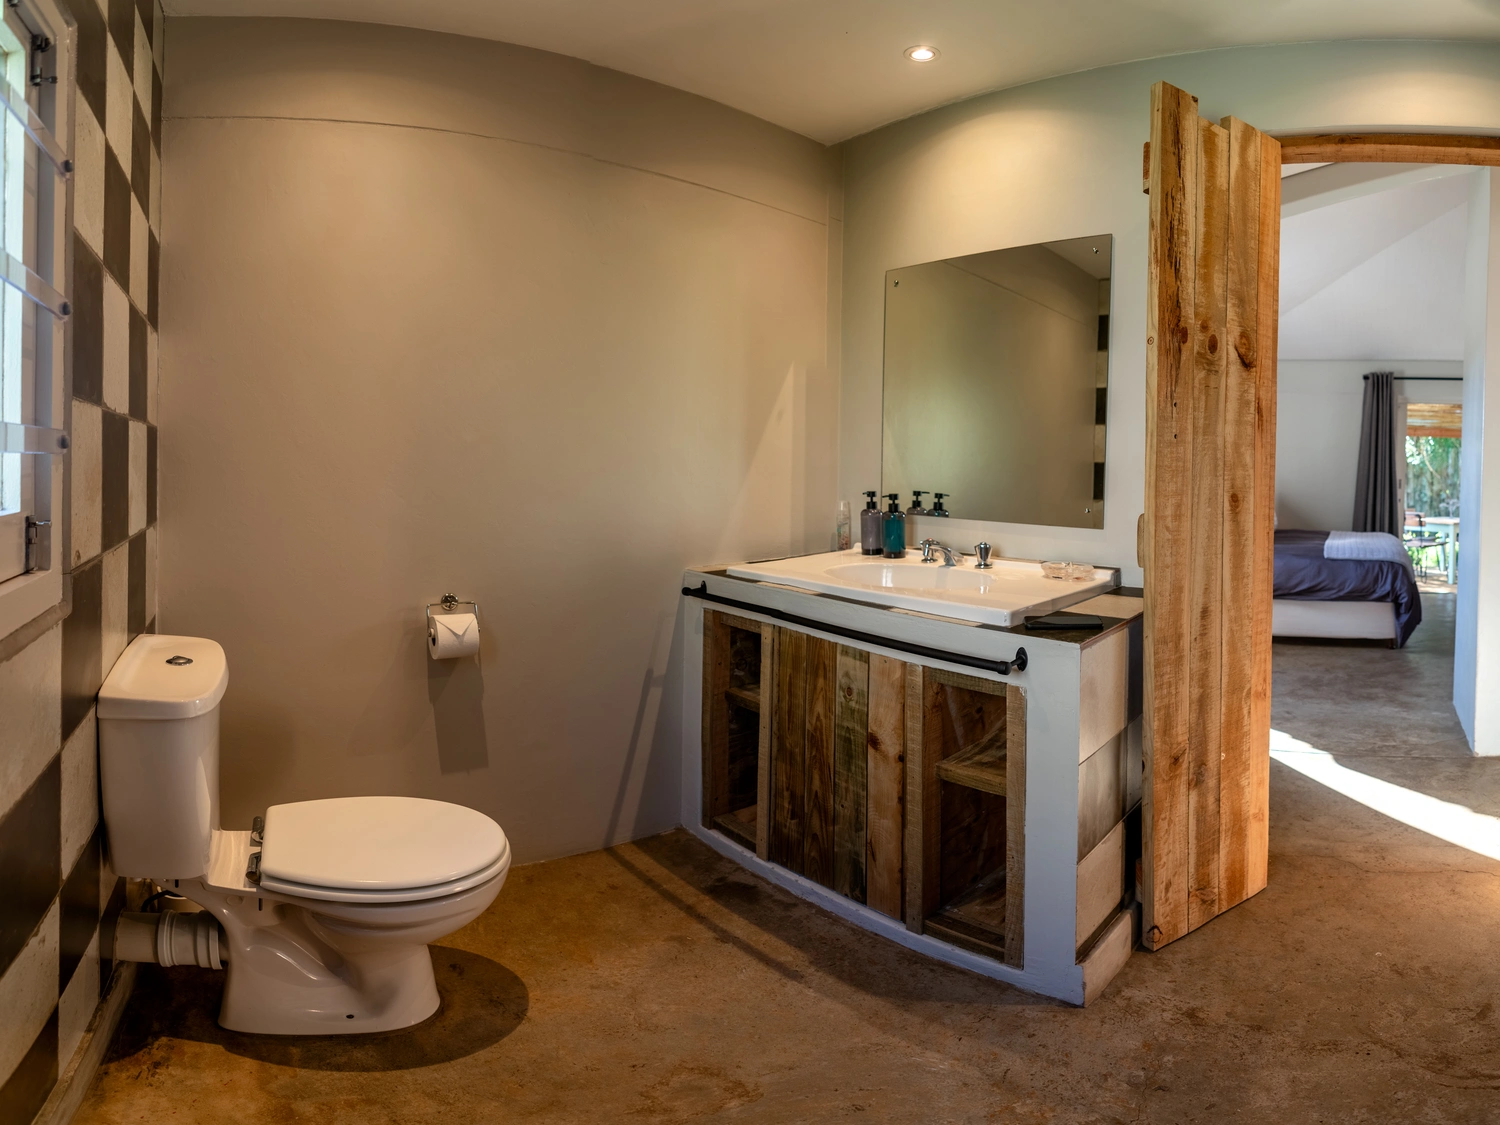 The en-suite bathroom is equipped with a shower